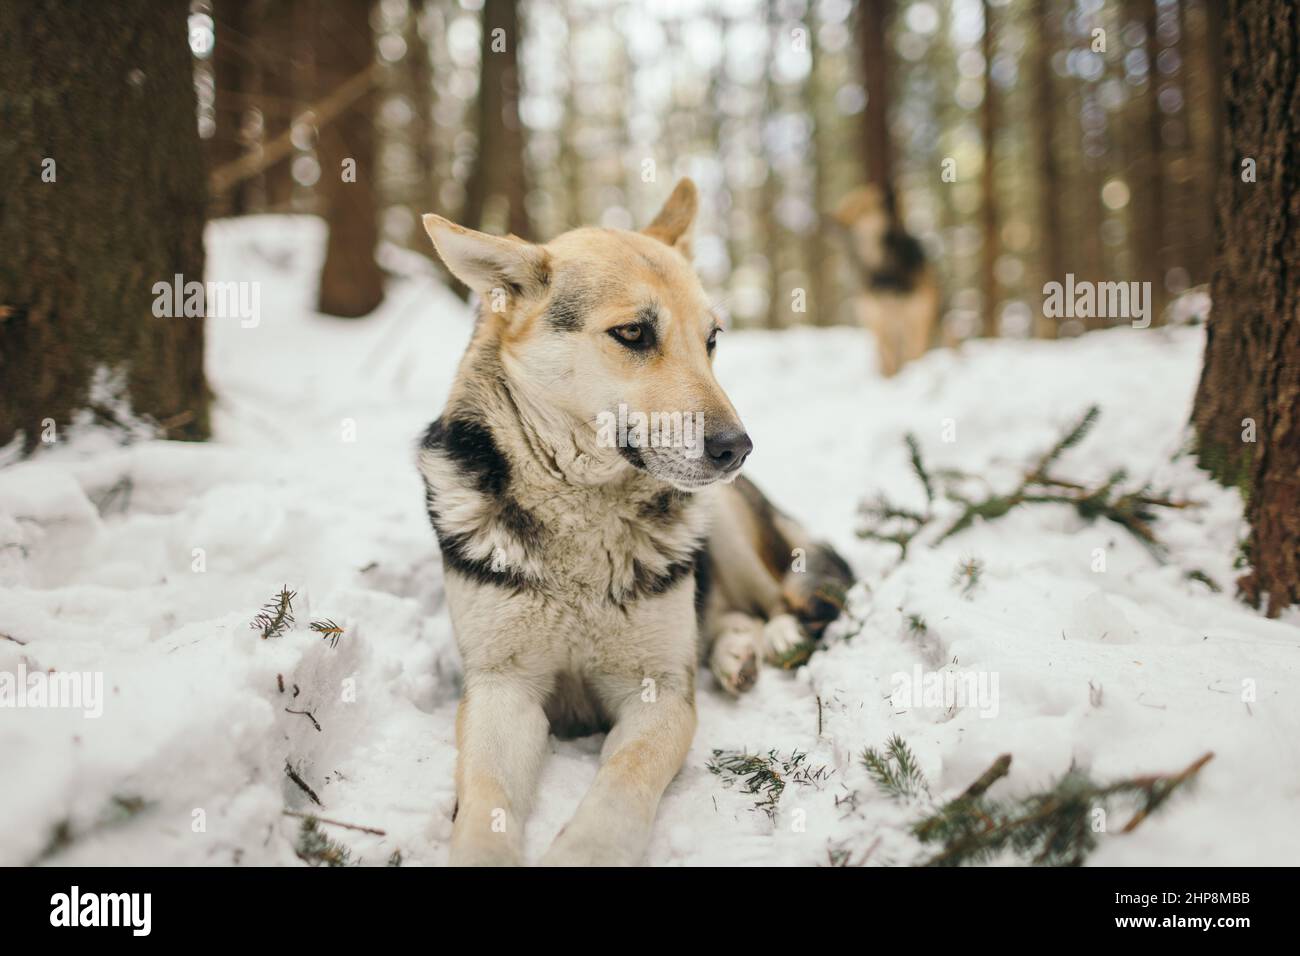 A dog that is covered in snow Stock Photo